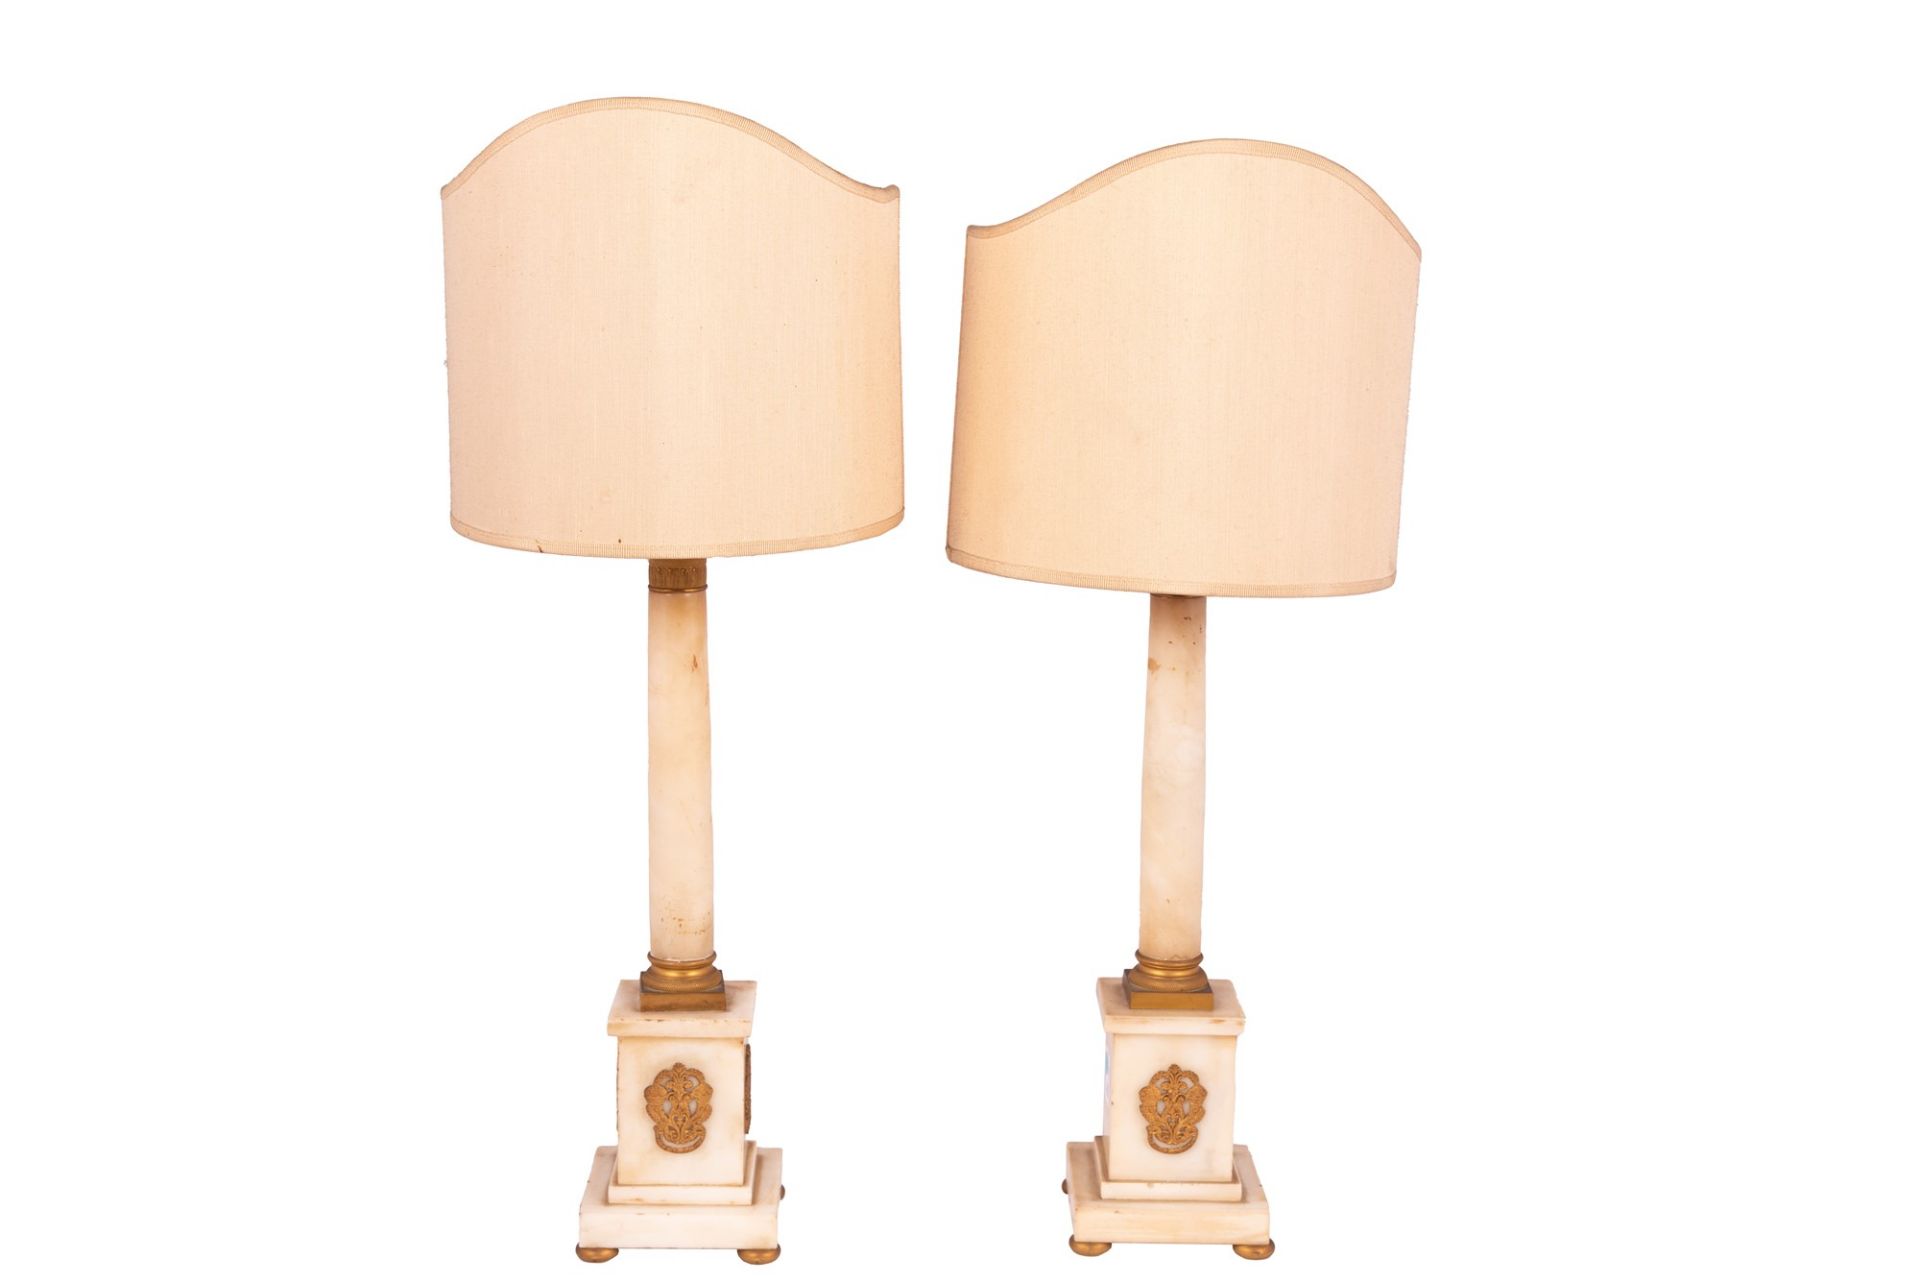  2 table lamps in column 